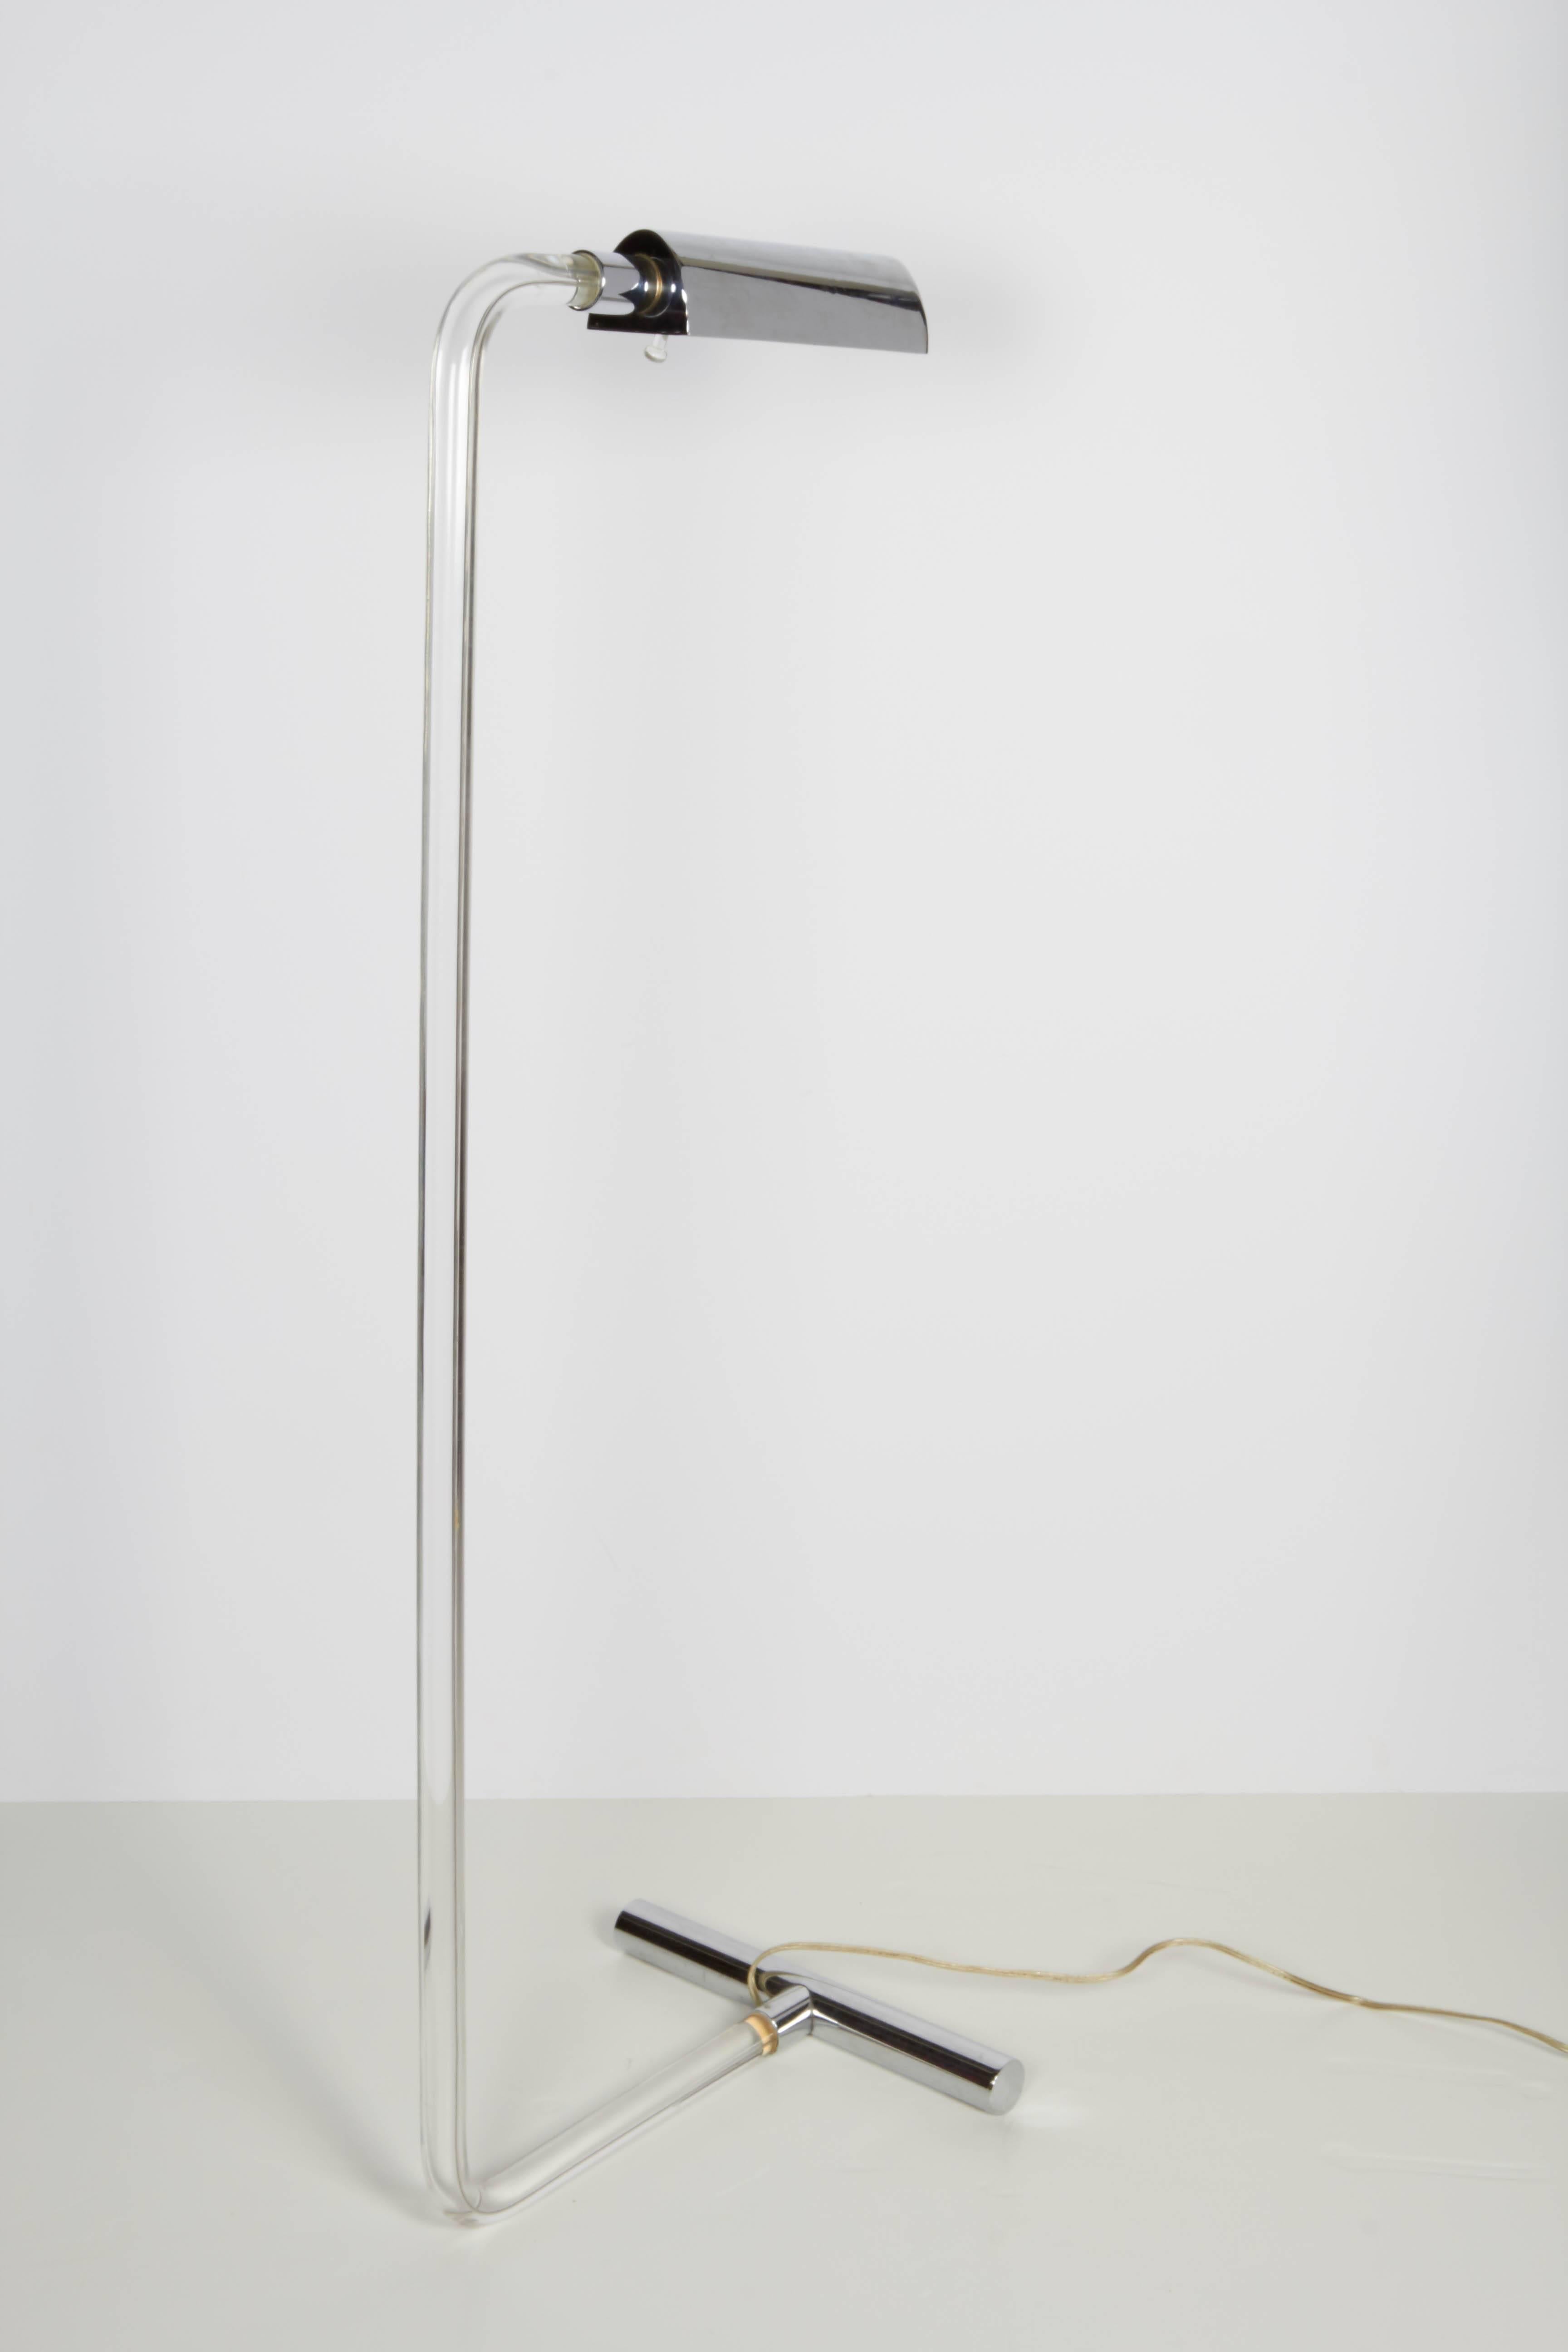 Peter Hamburger 'Crylicord' Floor Lamp in Lucite and Chrome 2